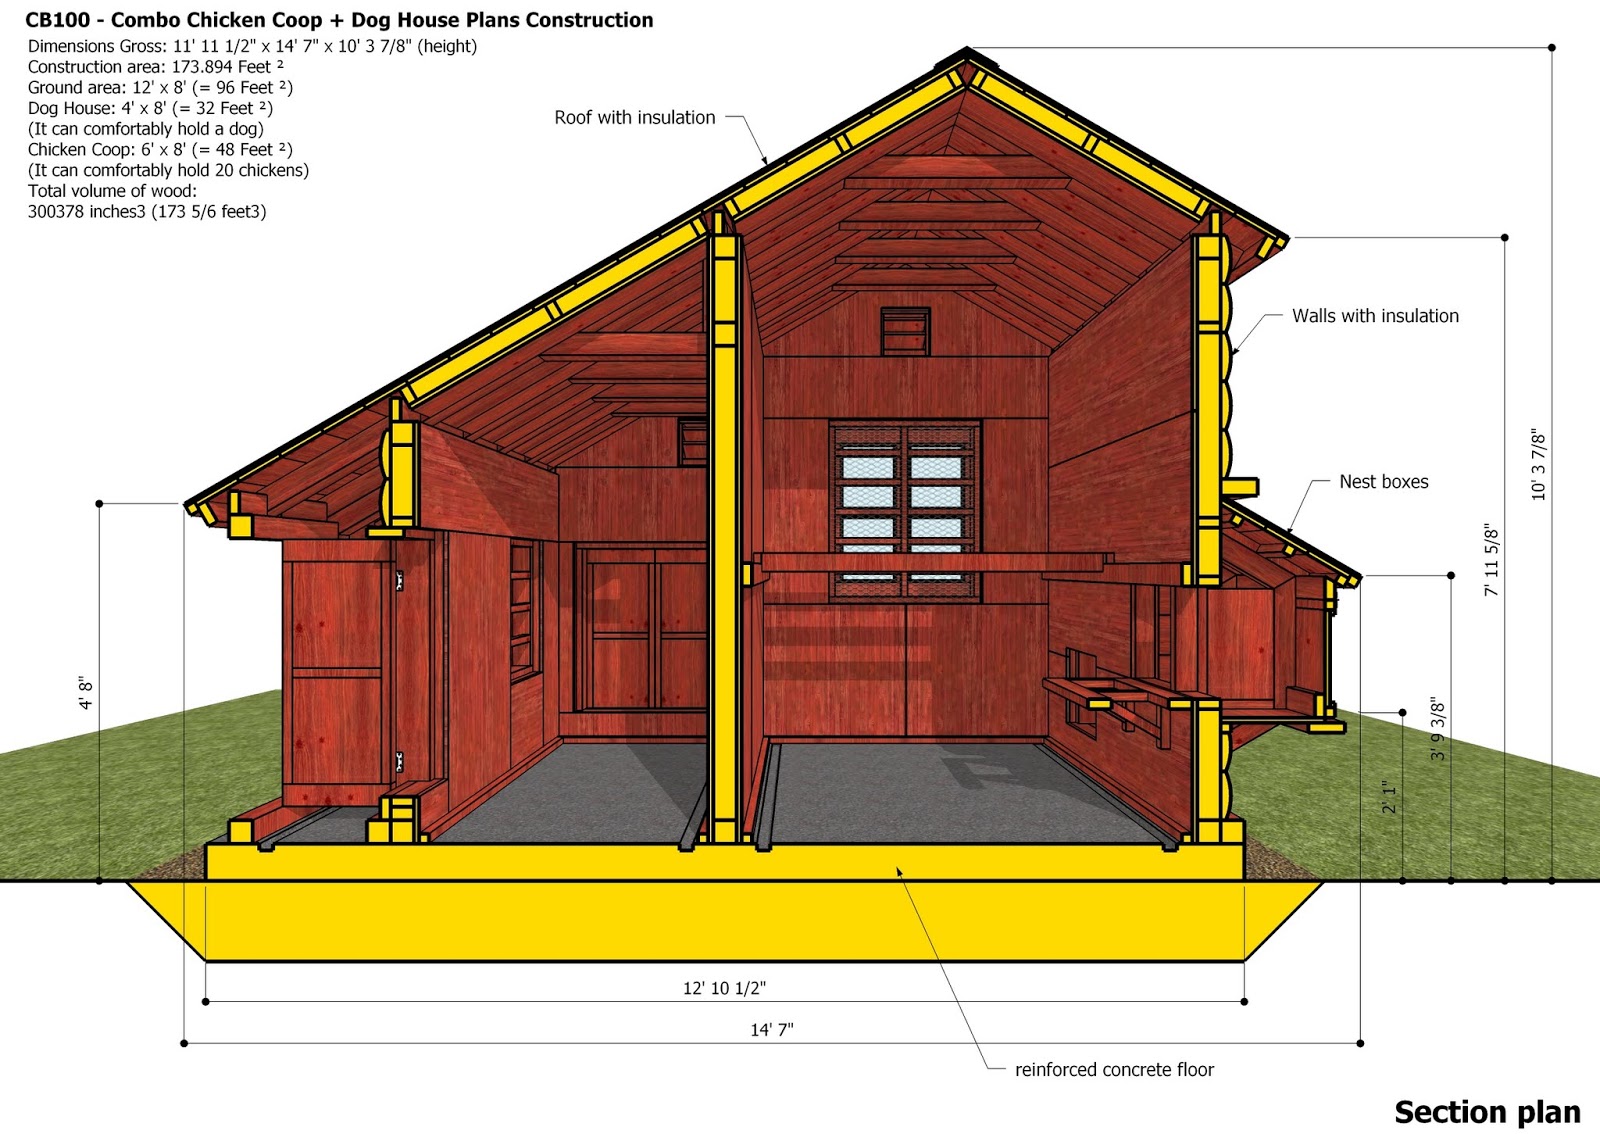 ... Plans - Chicken Coop Plans Construction + Insulated Dog House Plans